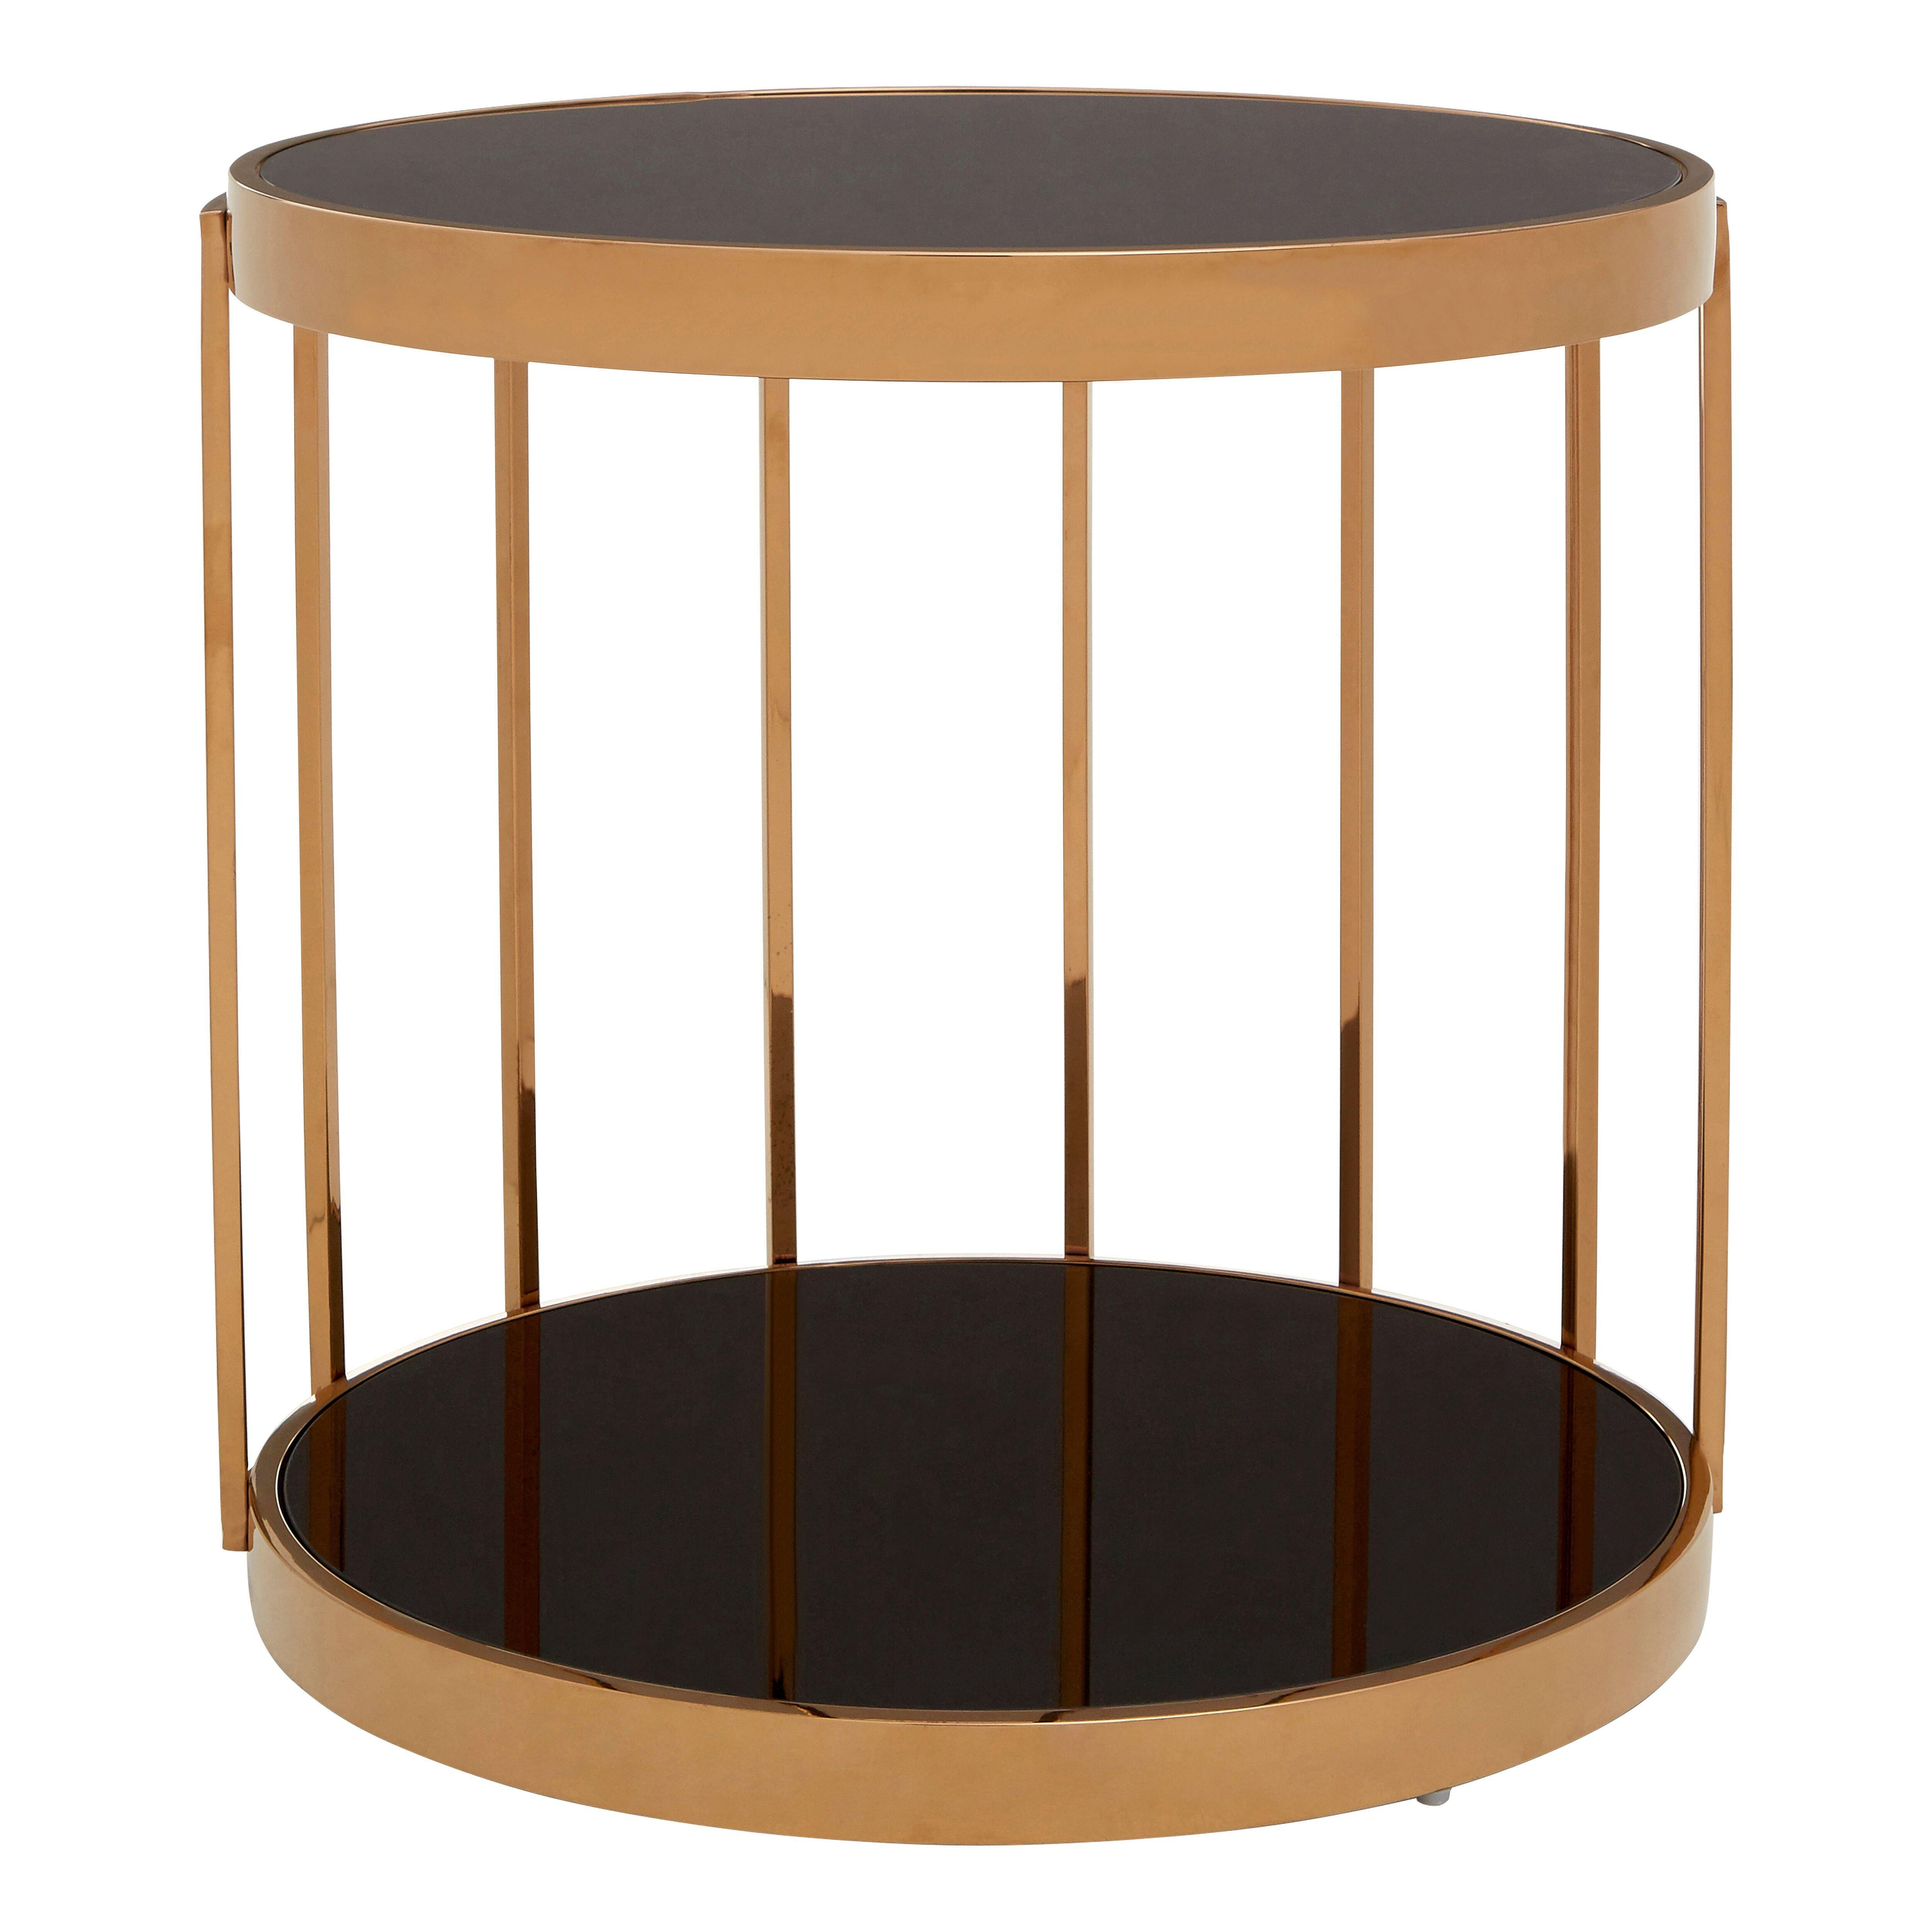 Modern Rose Gold Cage Design Side Table, Versatile Corner Table, Easily Maintained Small Bedside Table - image 1